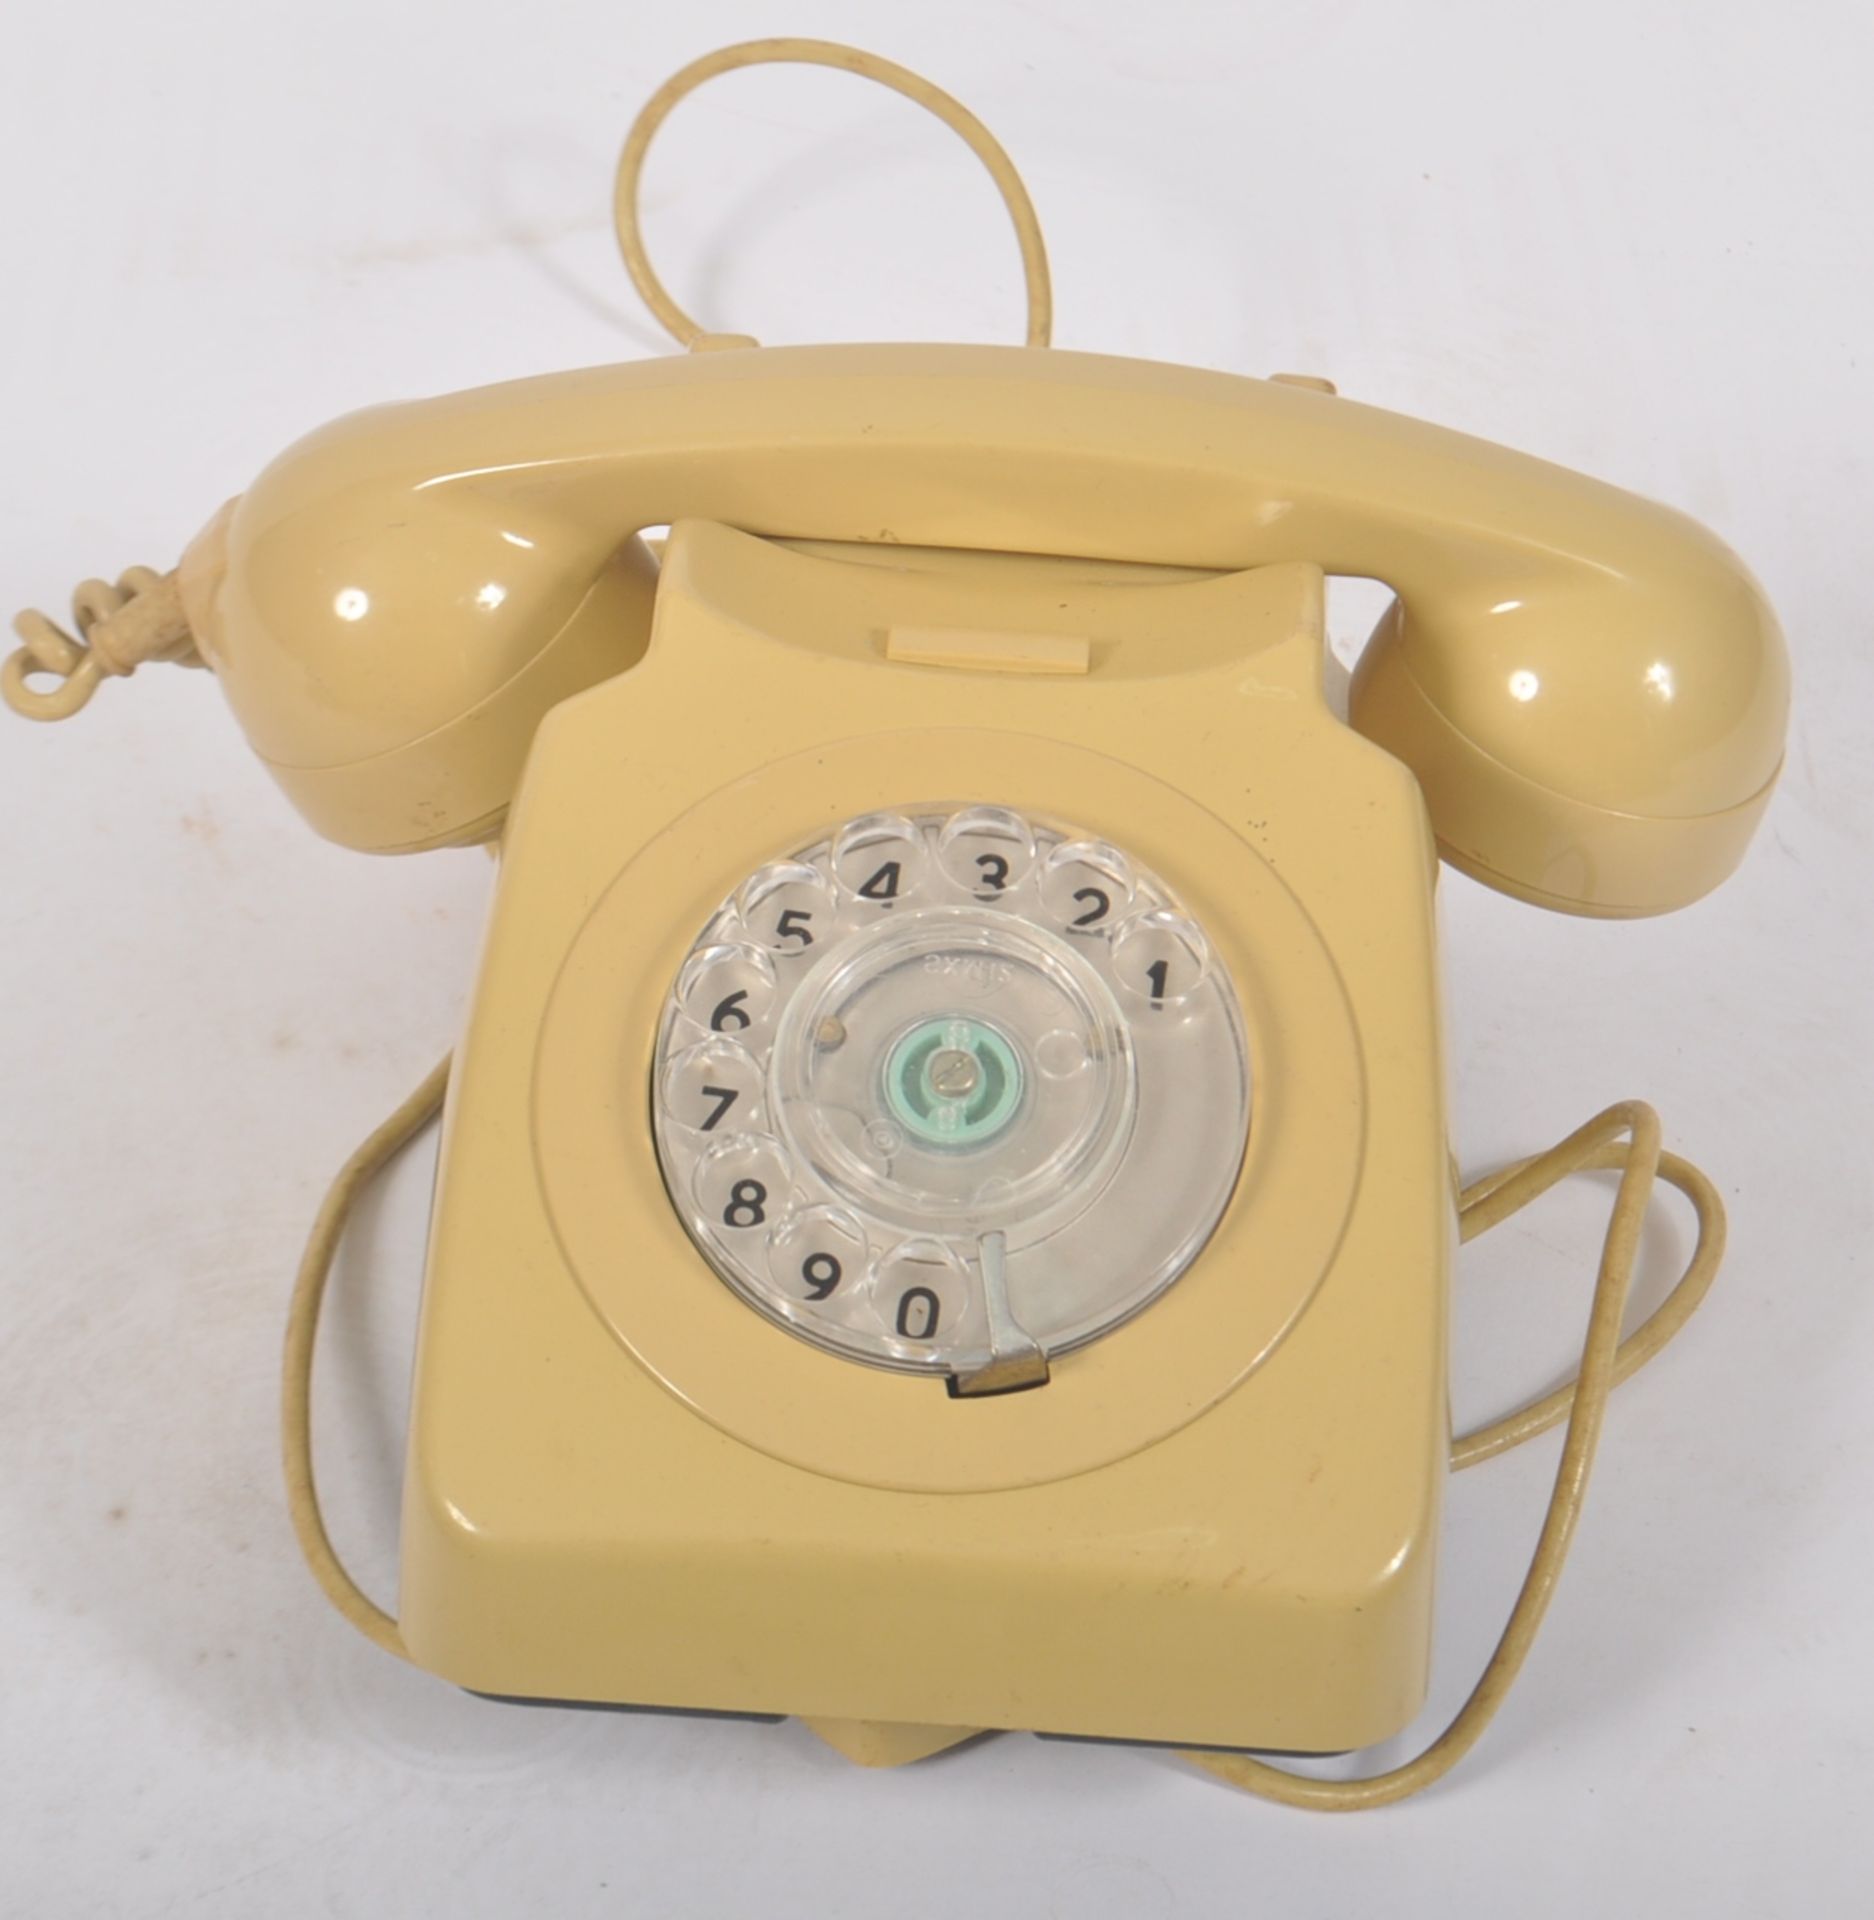 COLLECTION OF SEVEN VINTAGE 1970S ROTARY DIAL PO TELEPHONES - Image 2 of 9